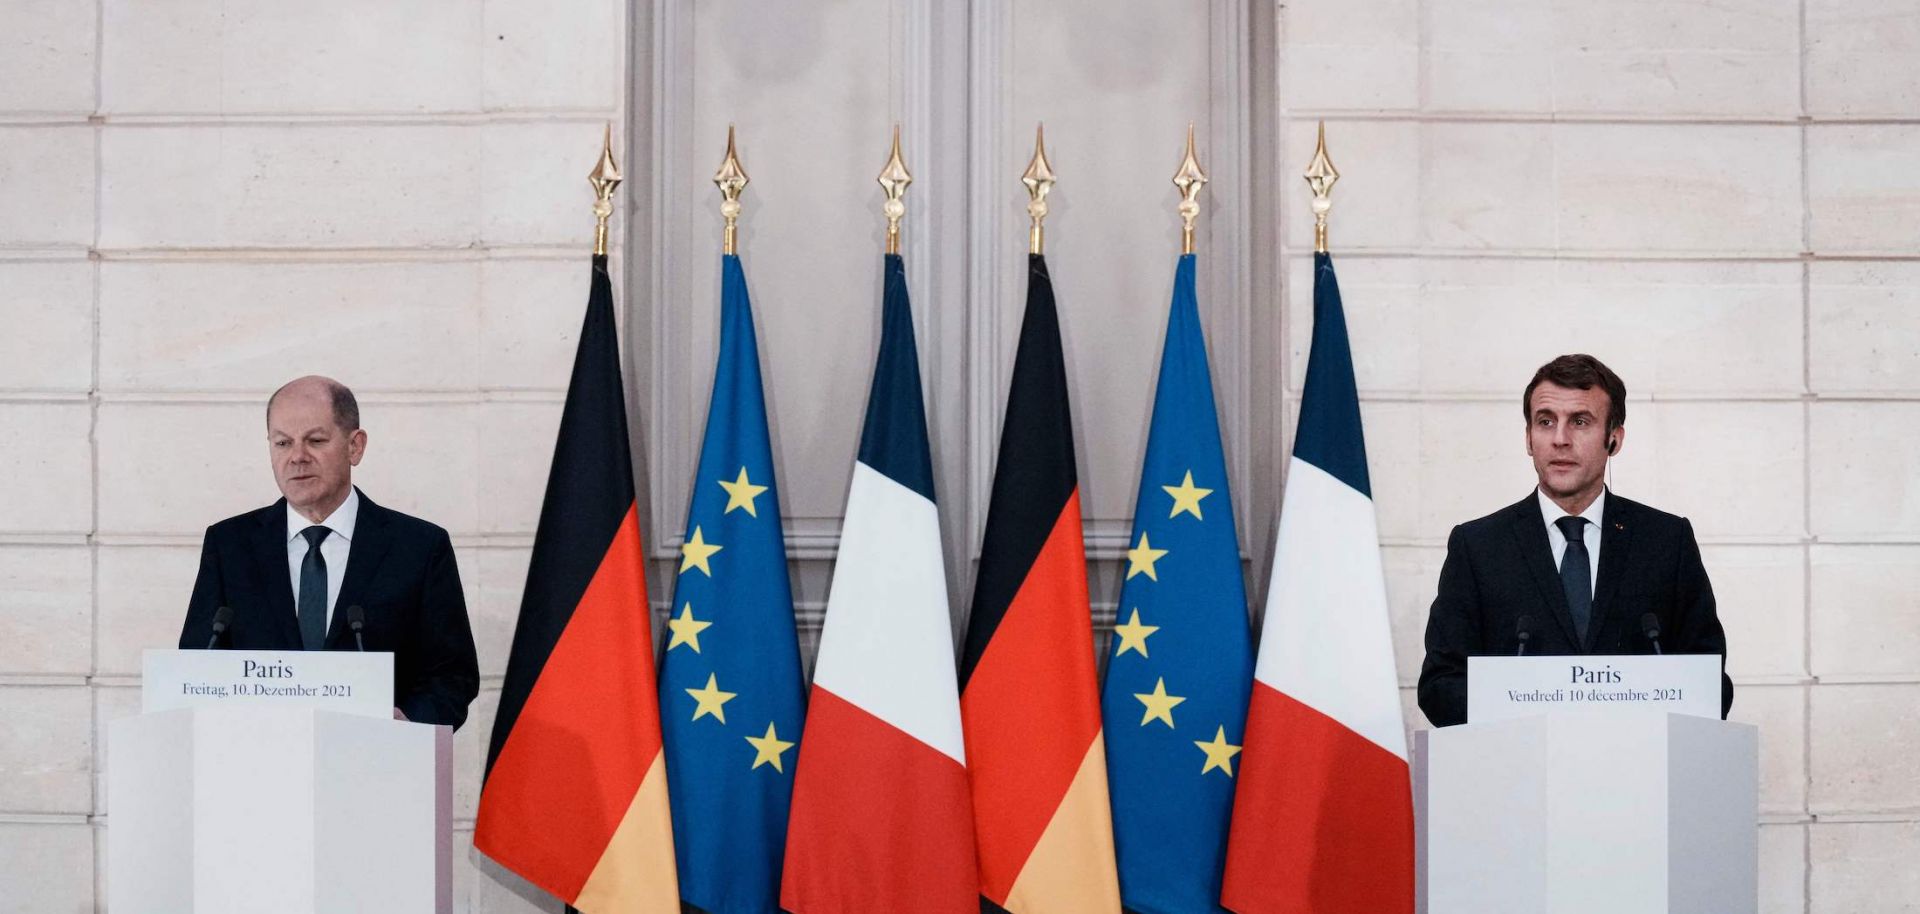 German Chancellor Olaf Scholz and French President Emmanuel Macron attend a media conference at the Elysee Palace in Paris